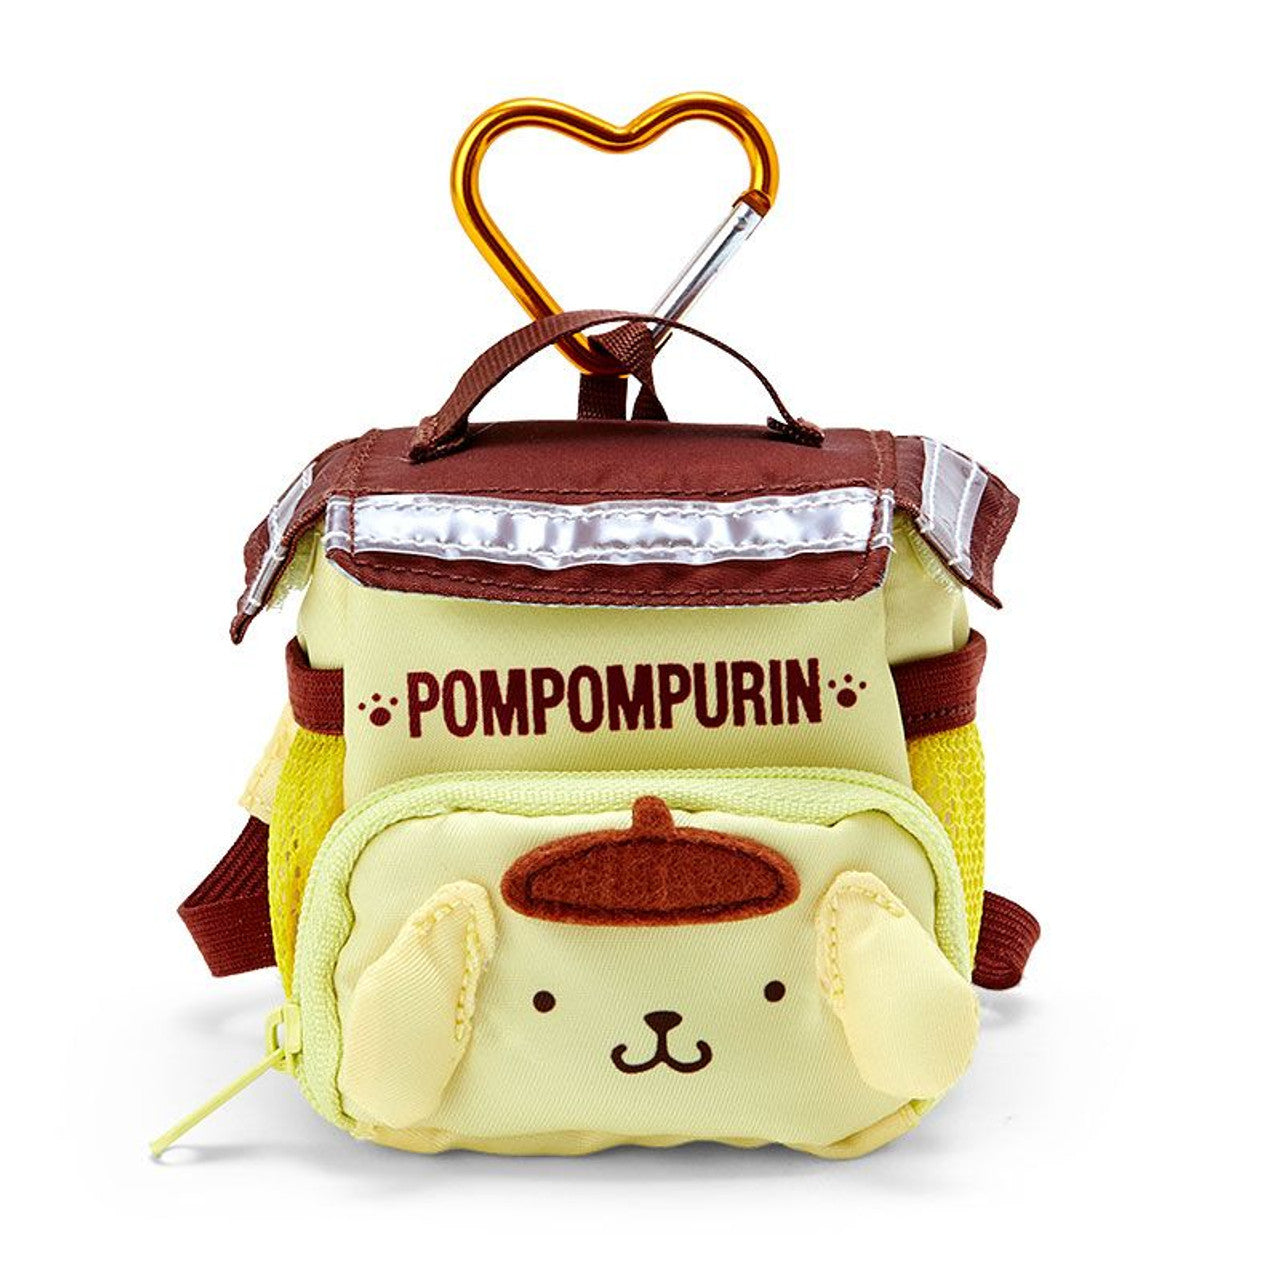 Pompompurin Keychain Pouch (Food Delivery Series)